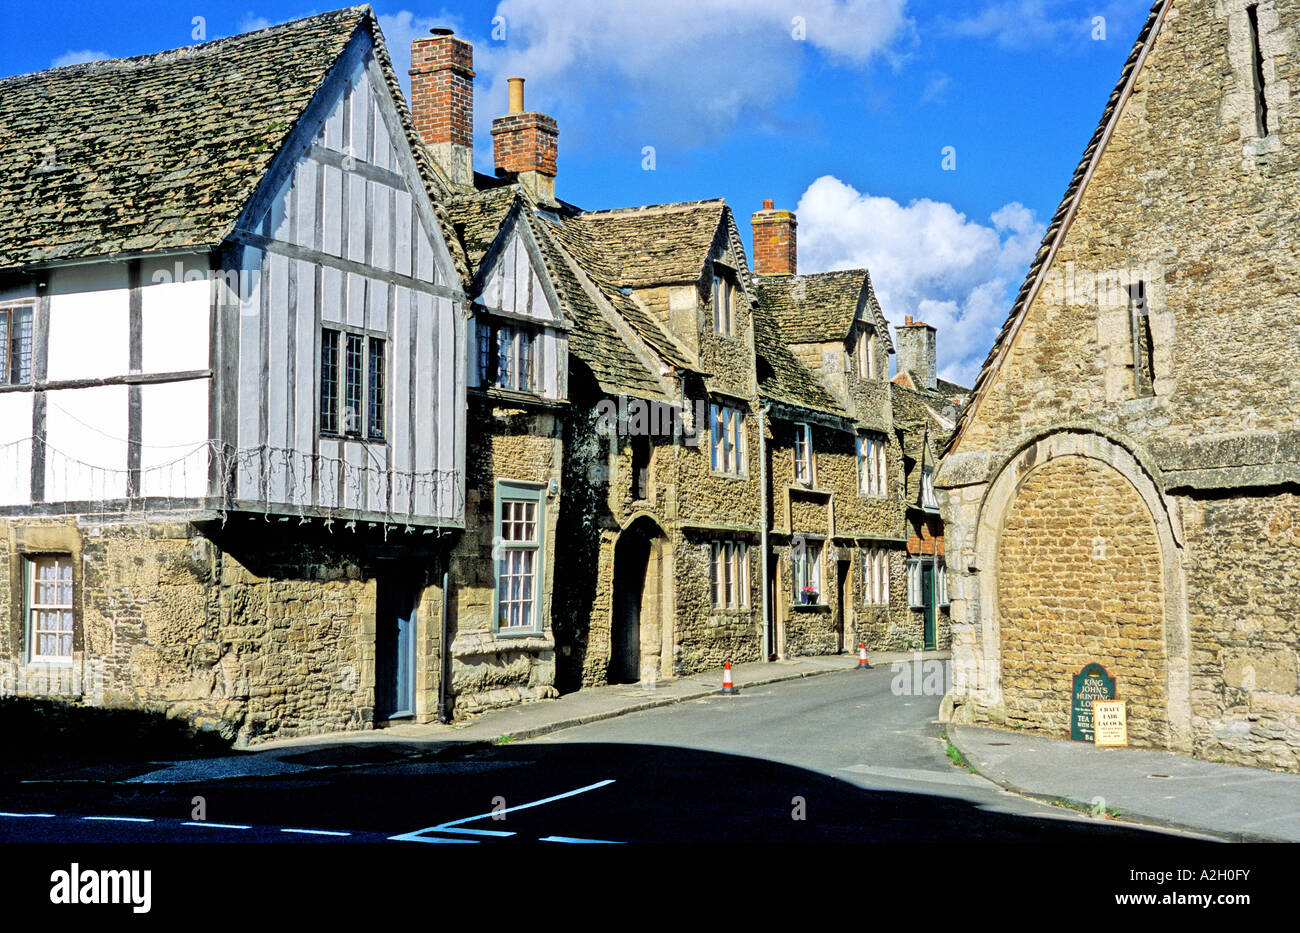 Old period stone houses in the heritage village Lacock Chippenham Wiltshire England UK EU Stock Photo